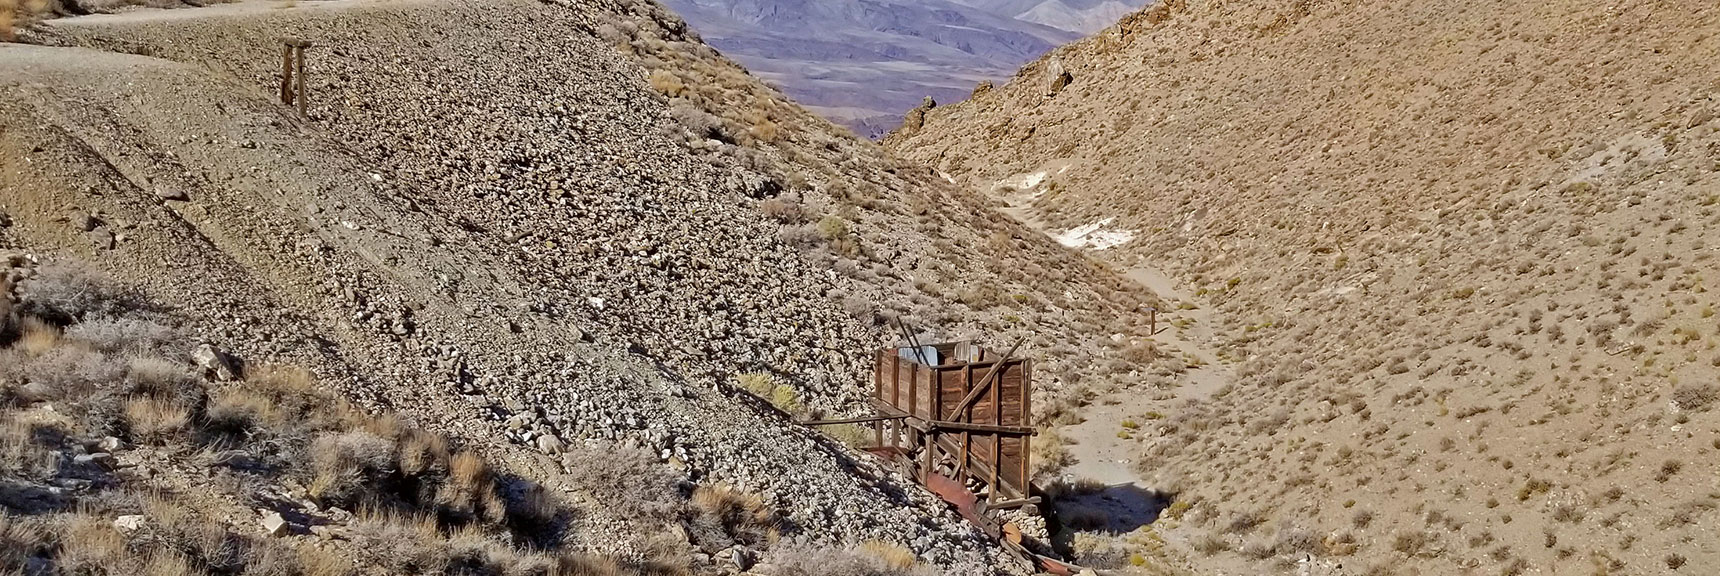 Could Be a Precursor to the Skidoo Stamp Mill? | Skidoo Stamp Mill, Panamint Mountains, Death Valley National Park, CA